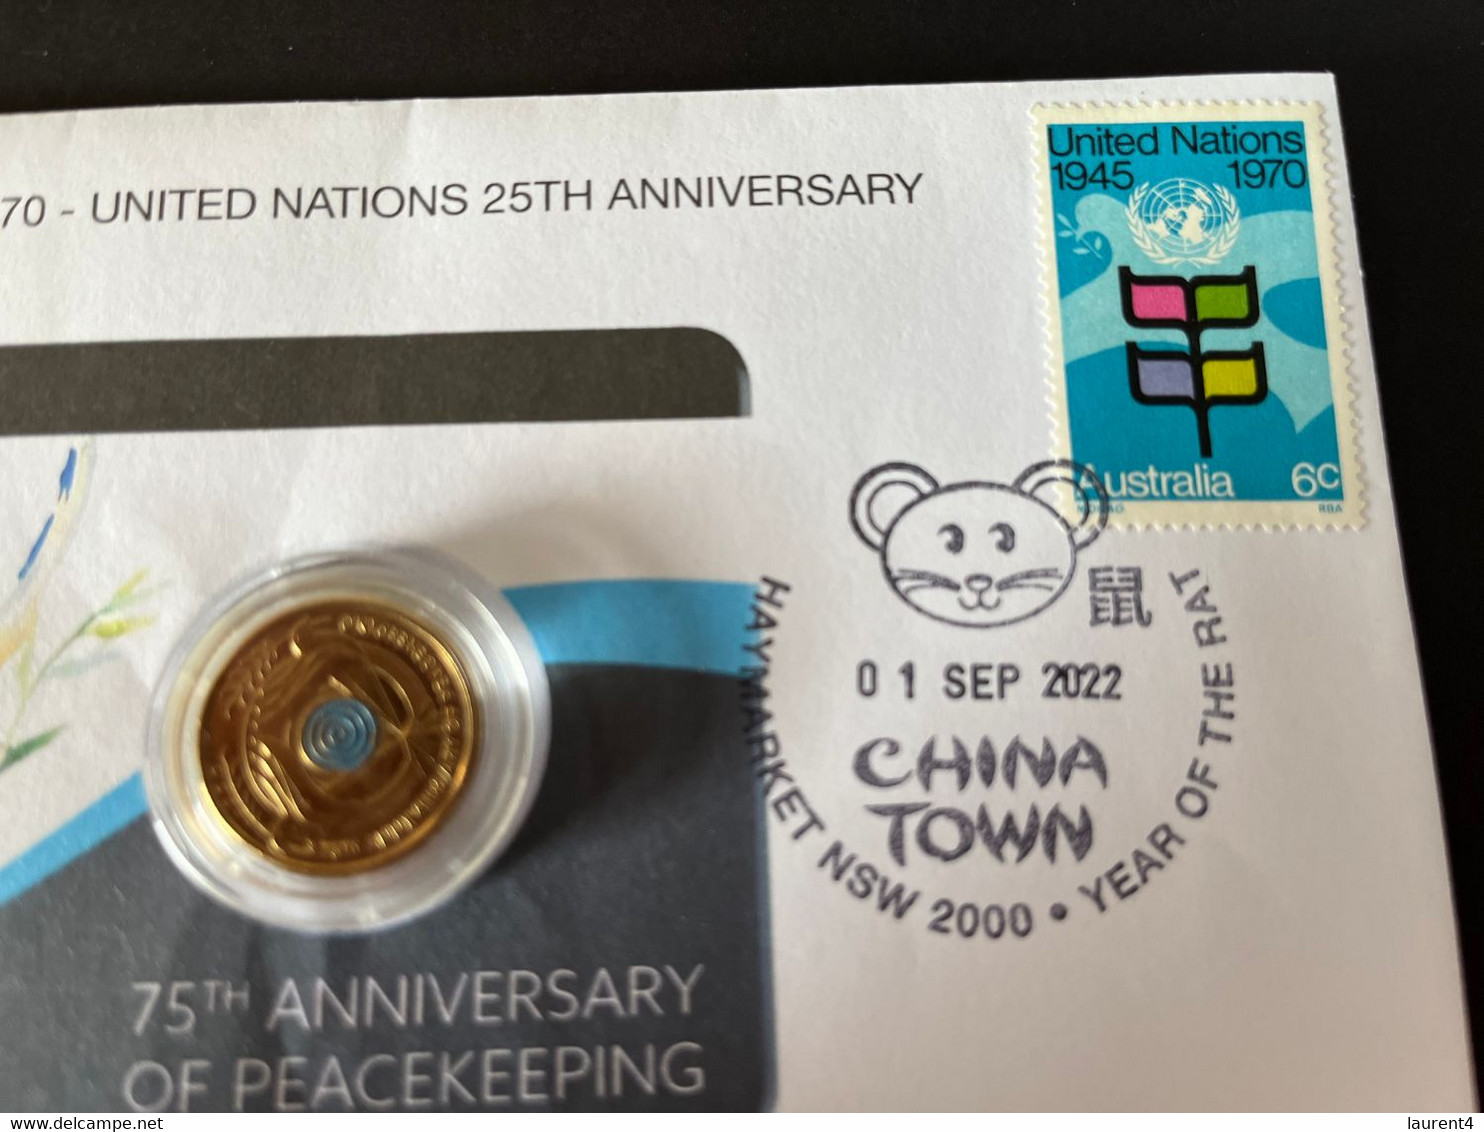 (3 L 57) Australian 75th Ann. Peacekkeping Coin On Cover With United Nations 1970 Australian Stamp - 2 Dollars